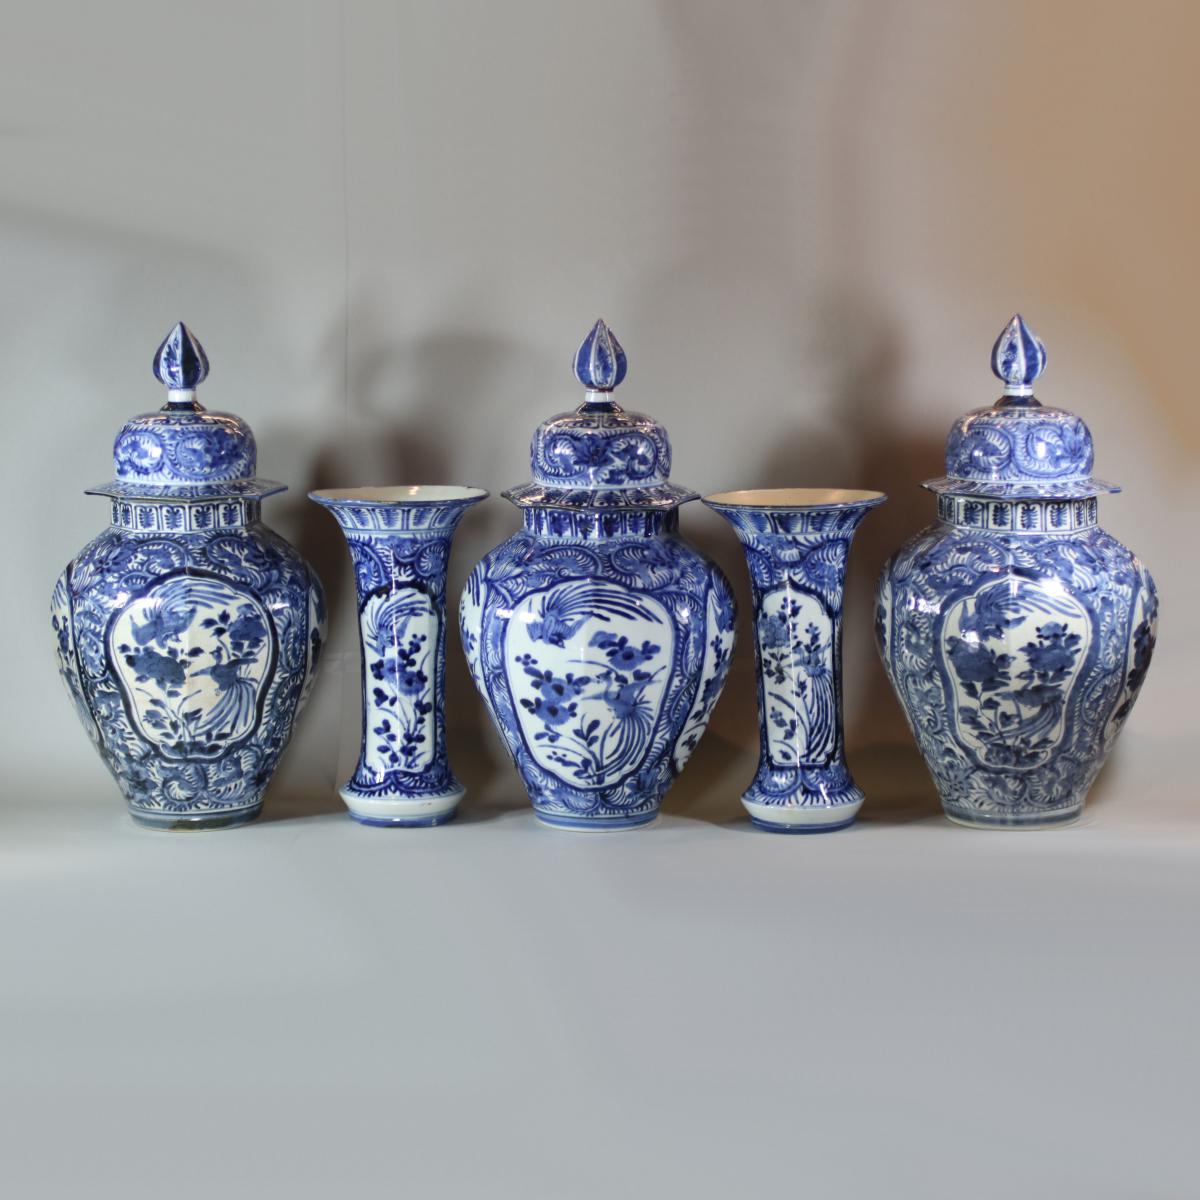 Japanese five-piece blue and white garniture, c. 1680